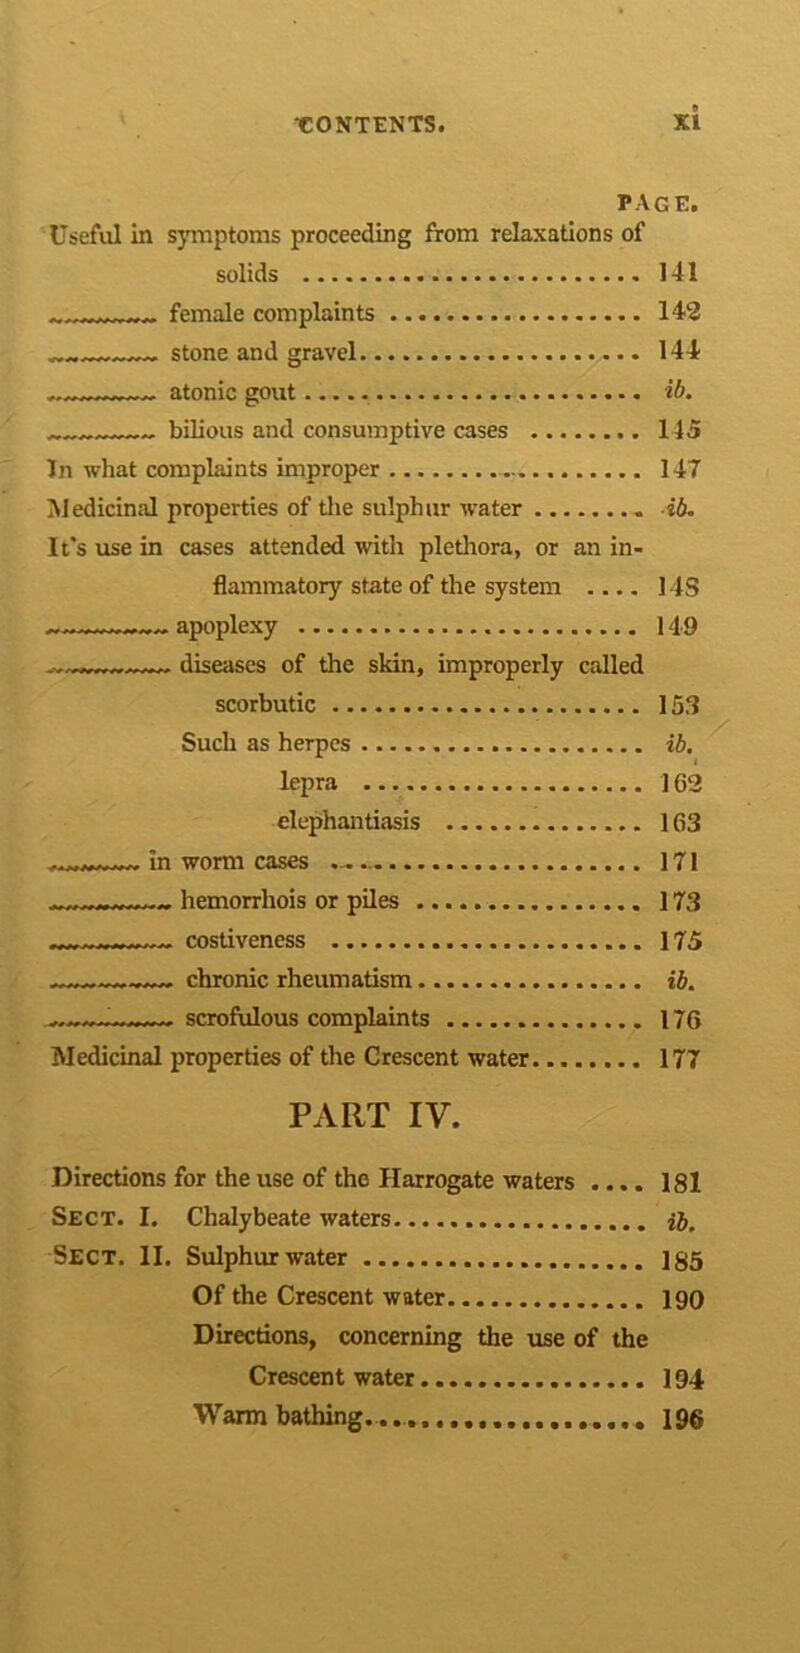 PAGE. Useful in symptoms proceeding from relaxations of solids 141 female complaints 142 stone and gravel ,. 144 atonic gout ib. bilious and consumptive cases 145 In what complaints improper 147 Medicinal properties of the sulphur water ib. It's use in cases attended with plethora, or an in- flammatory state of the system .... 14S apoplexy 149 diseases of the skin, improperly called scorbutic 153 Such as herpes ib. lepra 162 elephantiasis 163 in worm cases 171 hemorrhois or piles 173 costiveness 175 chronic rheumatism ib. scrofulous complaints 176 Medicinal properties of the Crescent water 177 PART IV. :/ Directions for the use of the Harrogate waters .... 181 Sect. I. Chalybeate waters H. Sect. II. Sulphur water 185 Of the Crescent water 190 Directions, concerning the use of the Crescent water 194 Warm bathing............... 196